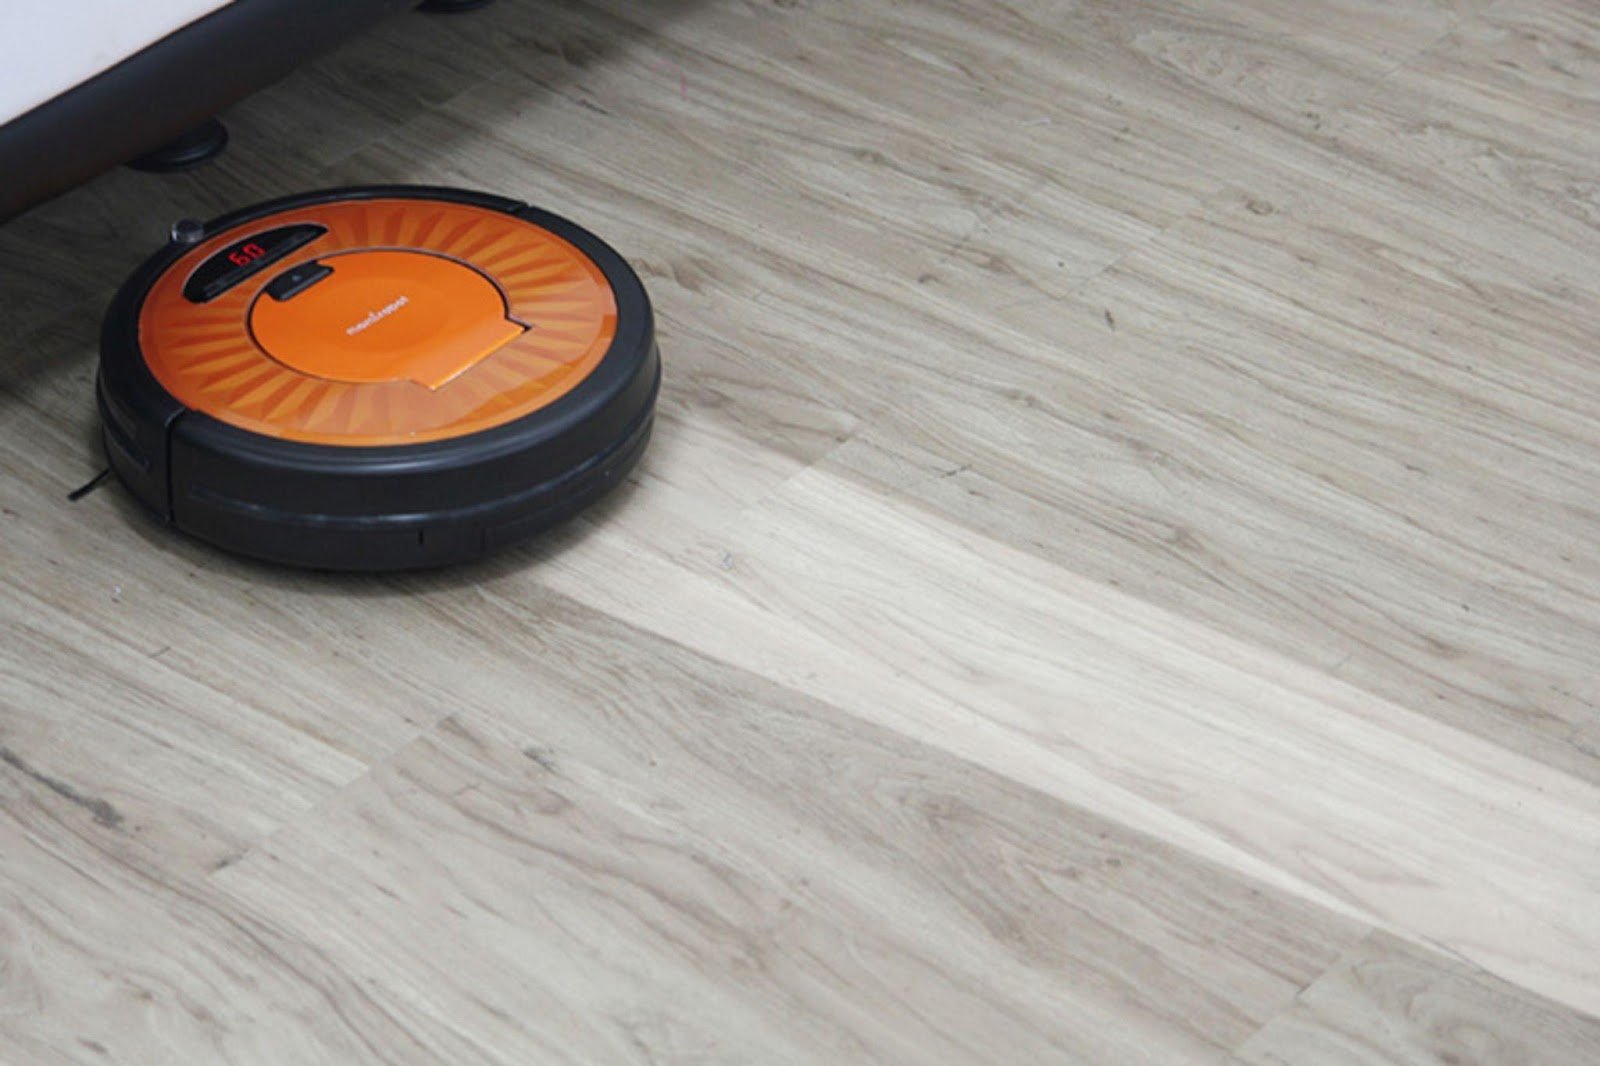 Robot Vacuum on Solid Surfaces